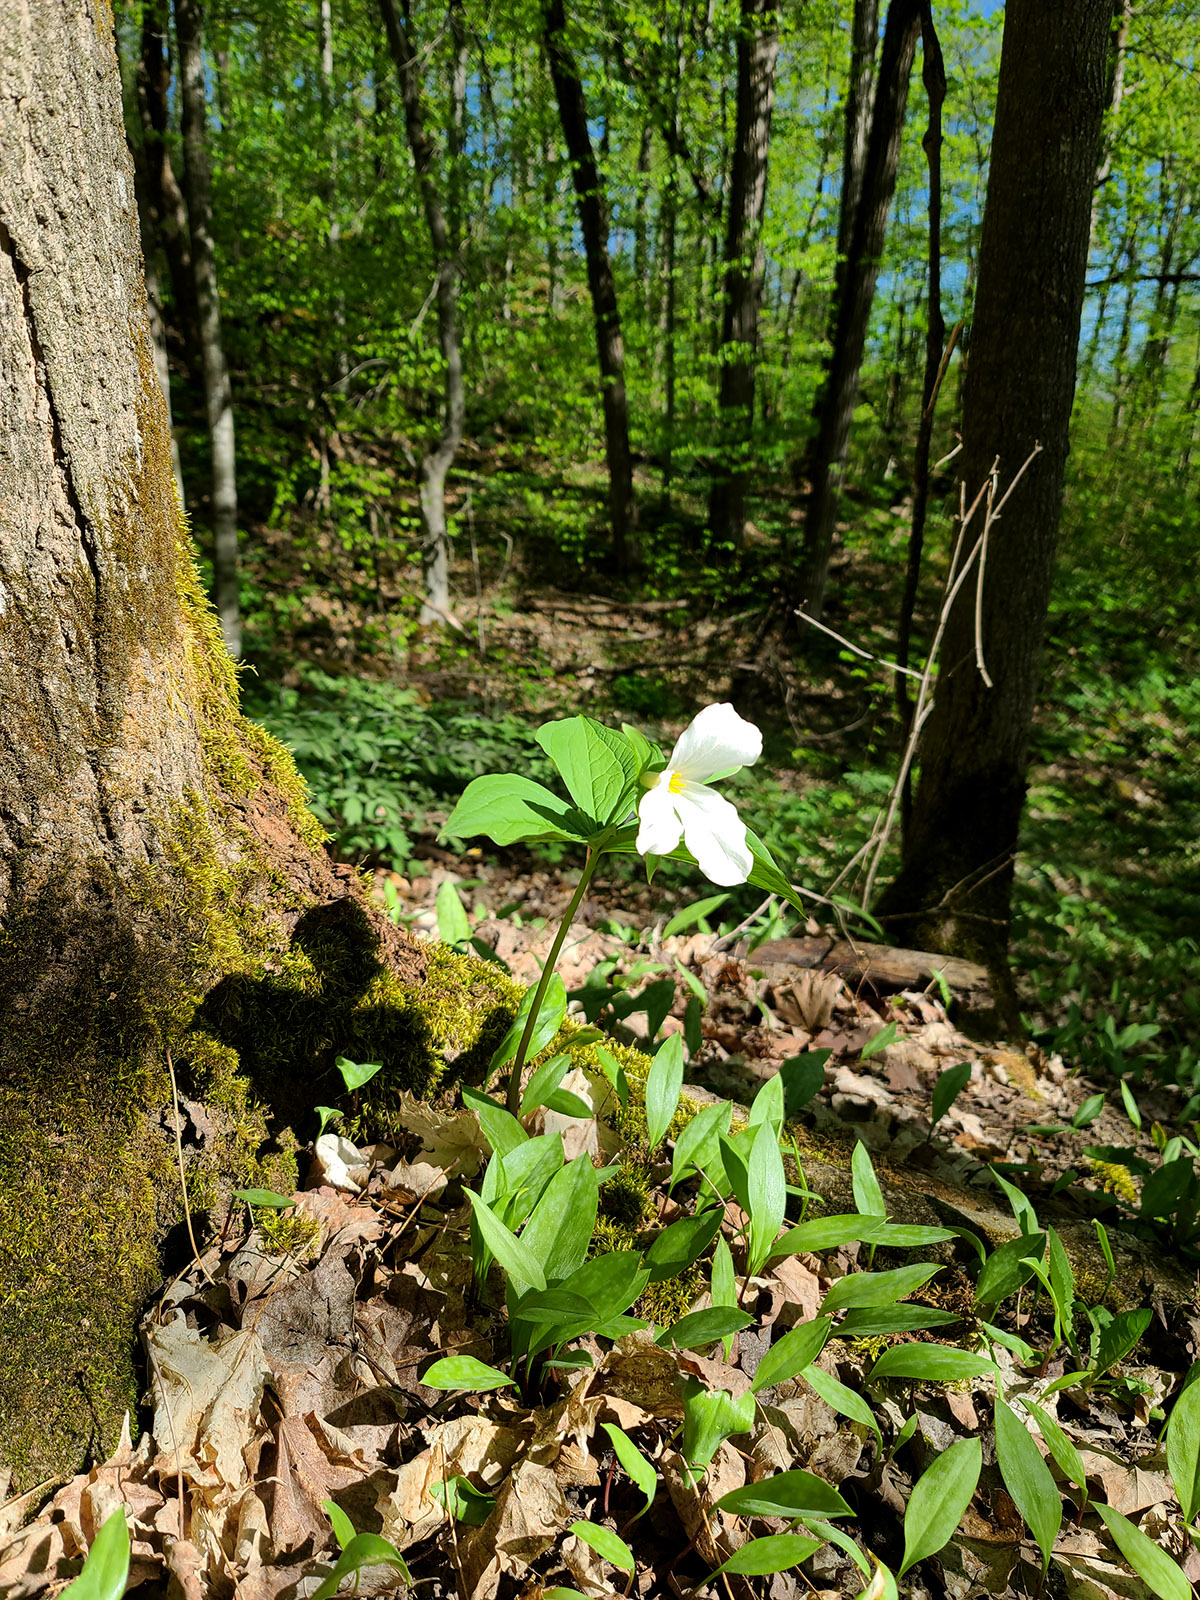 A Trillum flower growing in the woods.